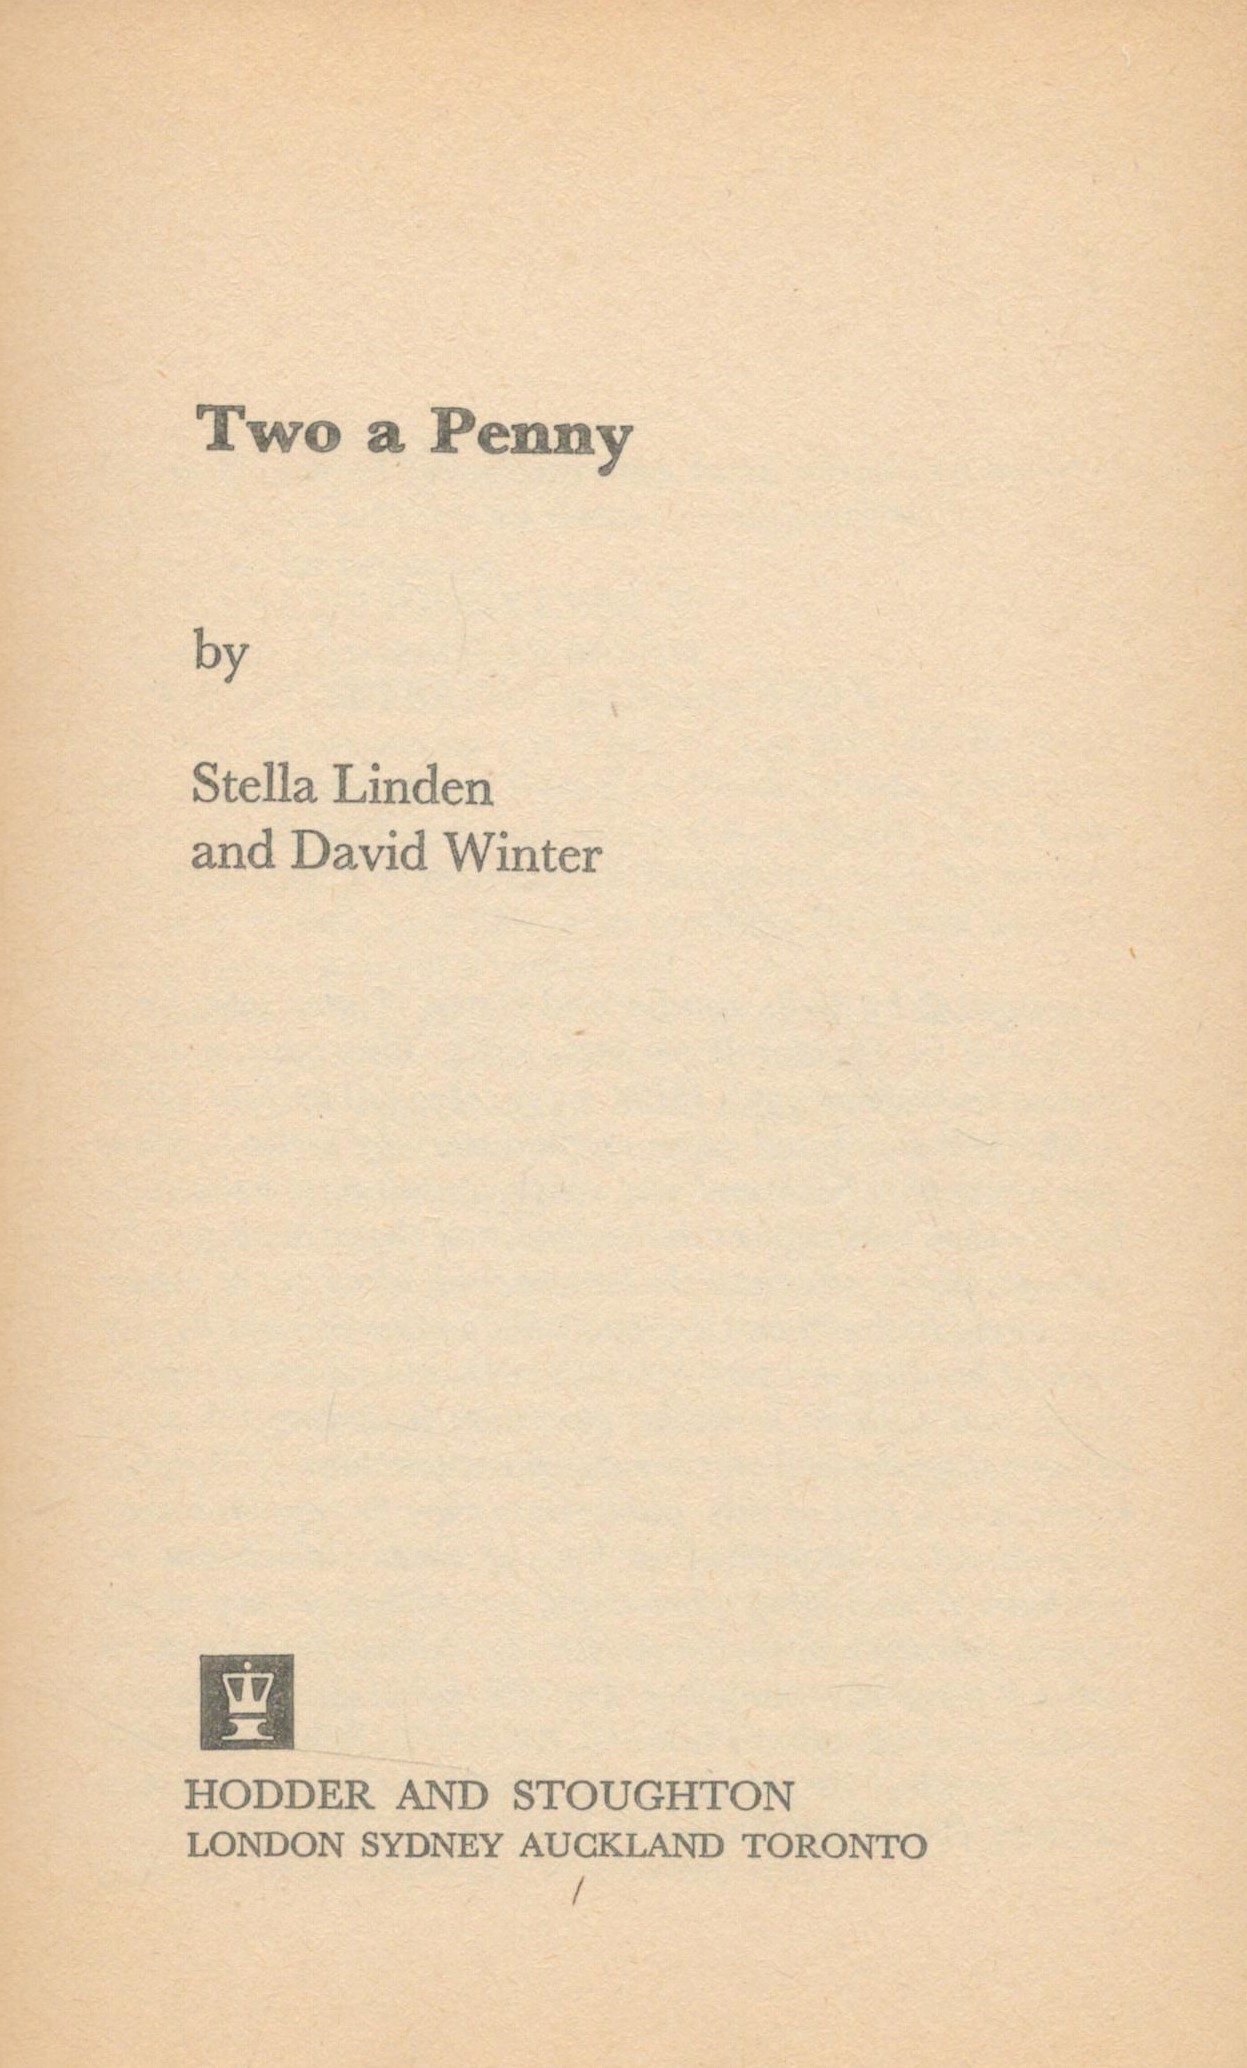 Cliff Richard Signed 1st Ed Paperback Book Titled Two a Penny by Stella Linden and David Winter. - Bild 3 aus 4